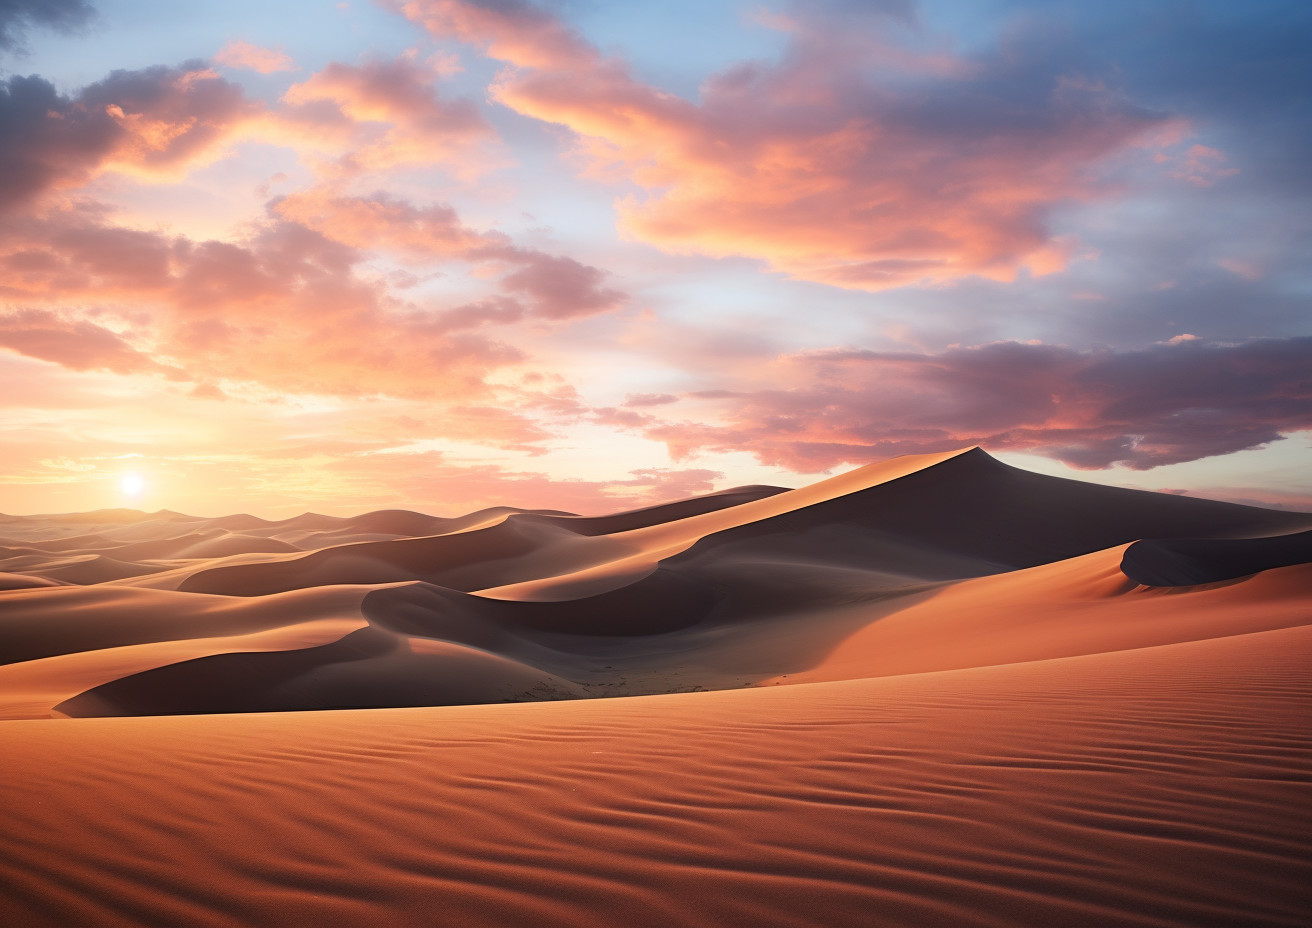 Digital art inspired by Great Sand Dunes National Park, Colorado